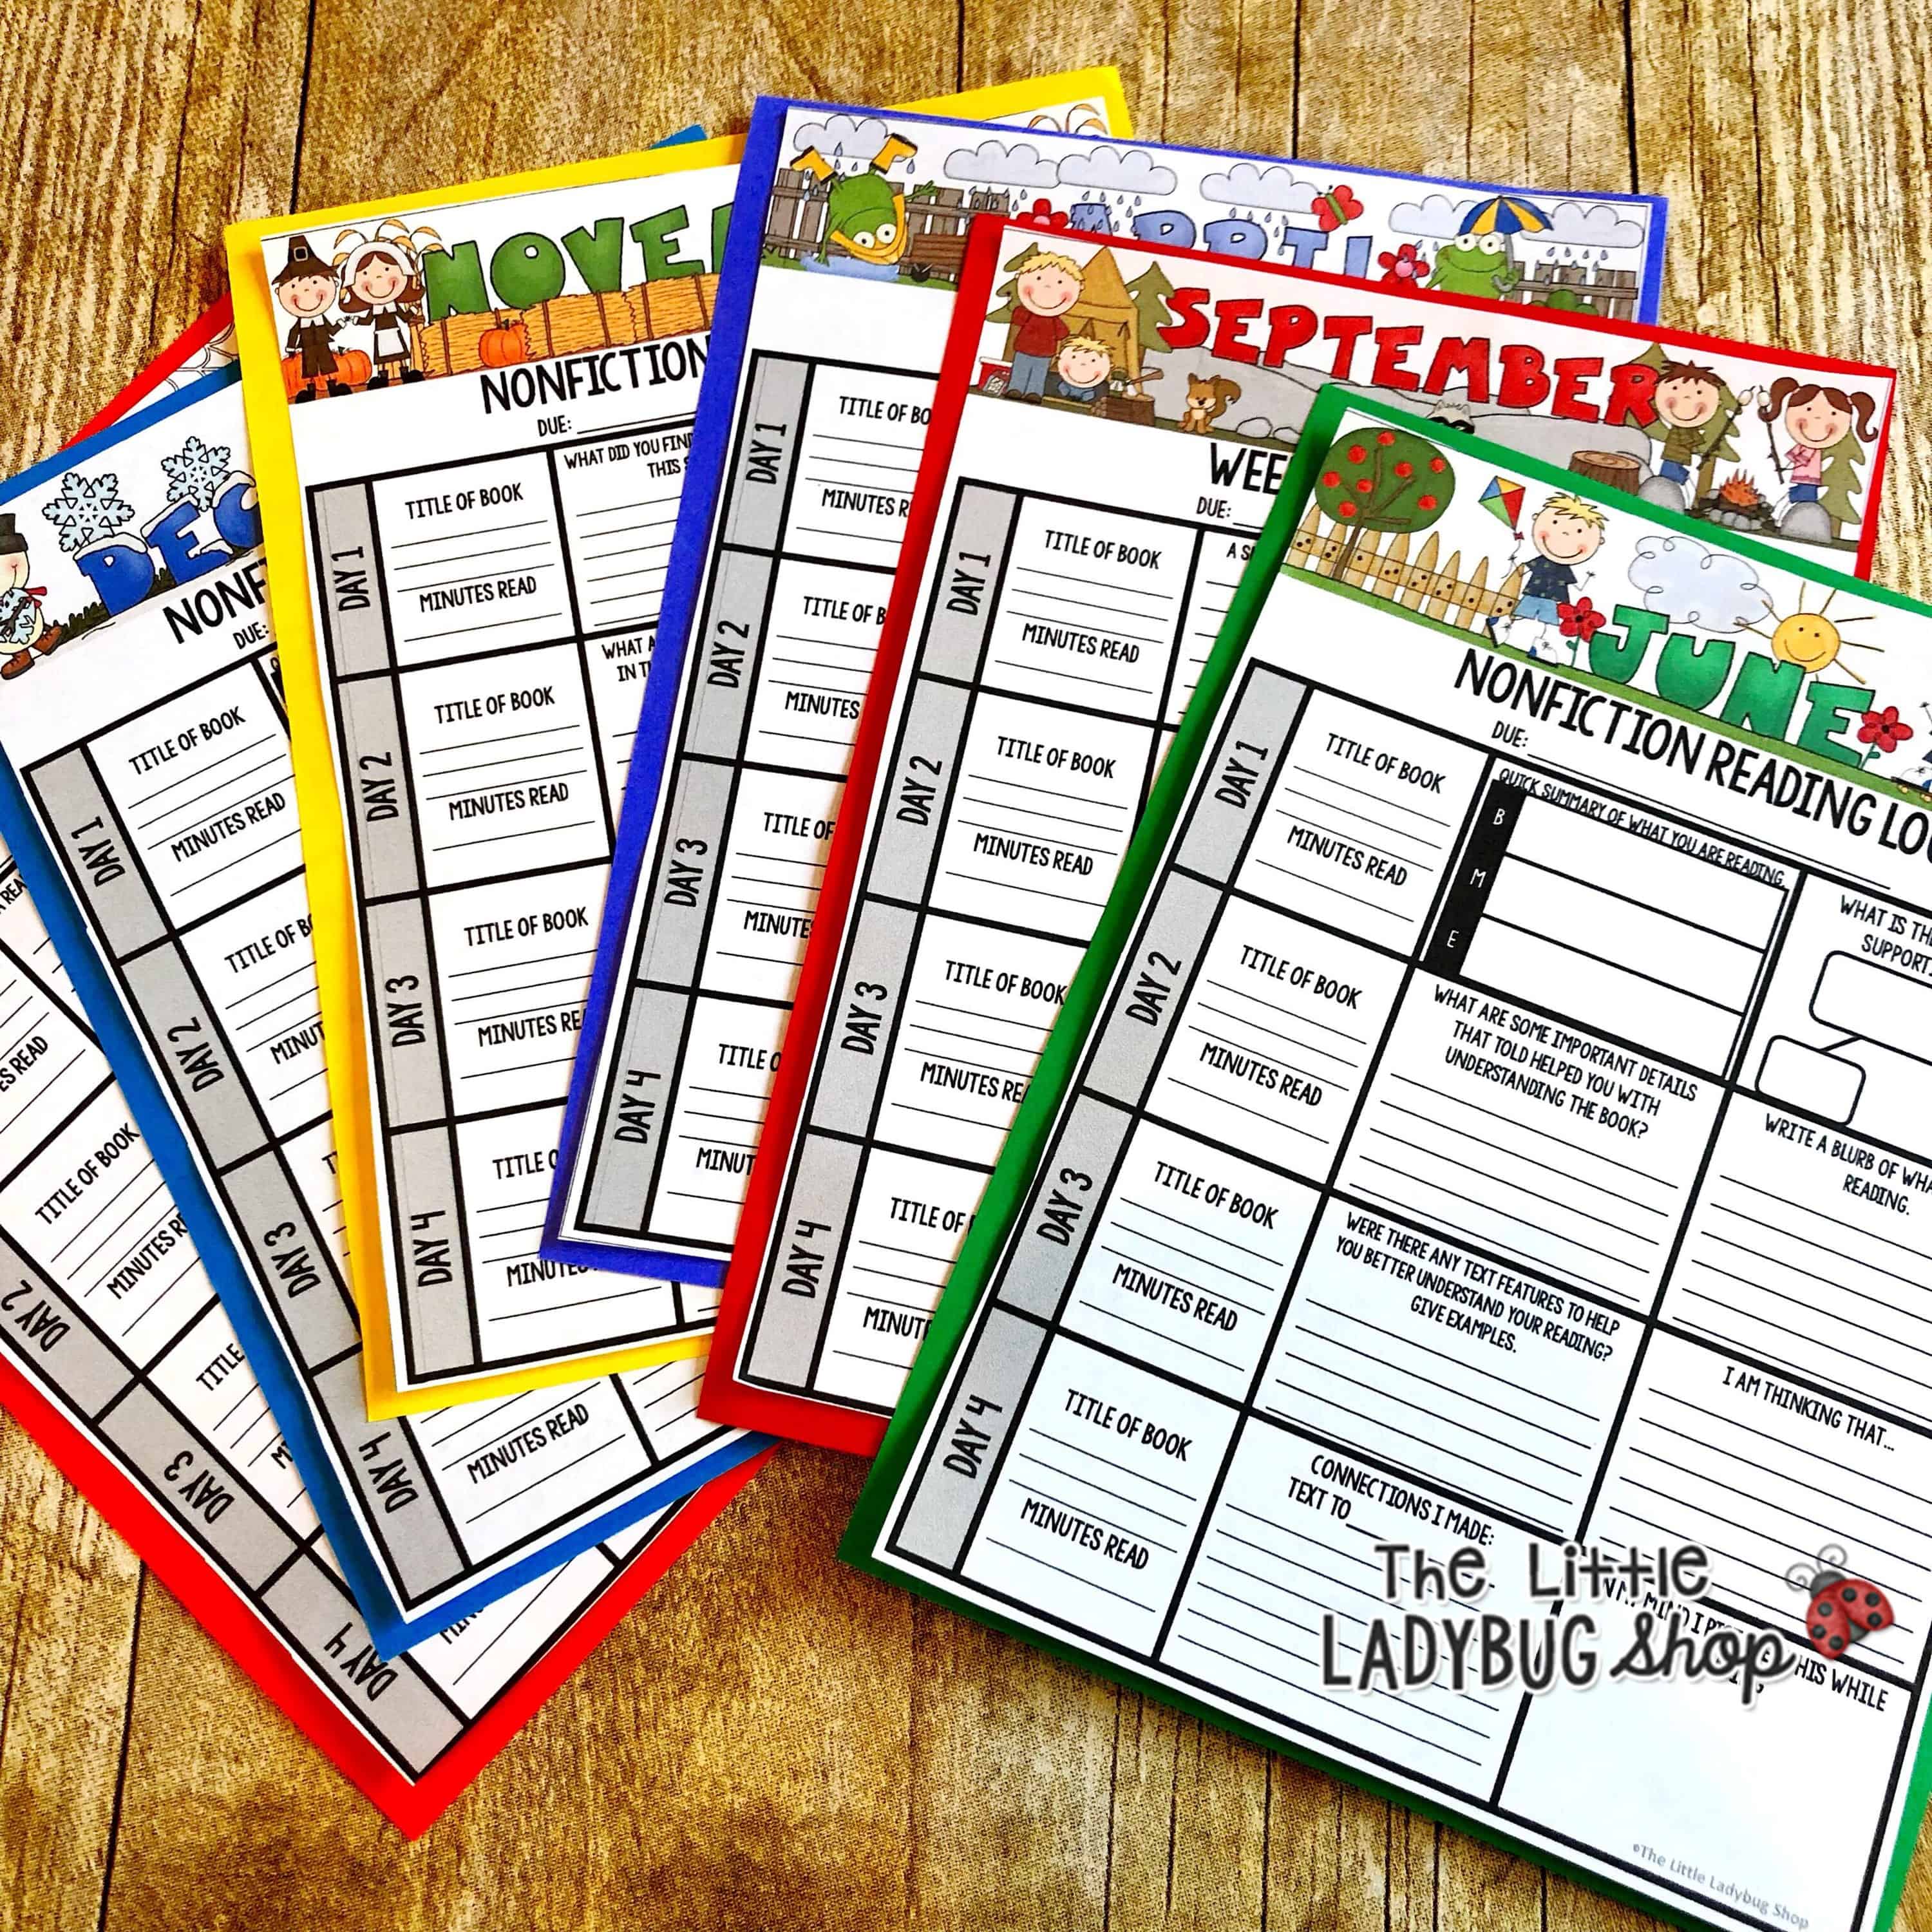 Strategies to Help Motivate Readers in your classroom through using reading logs